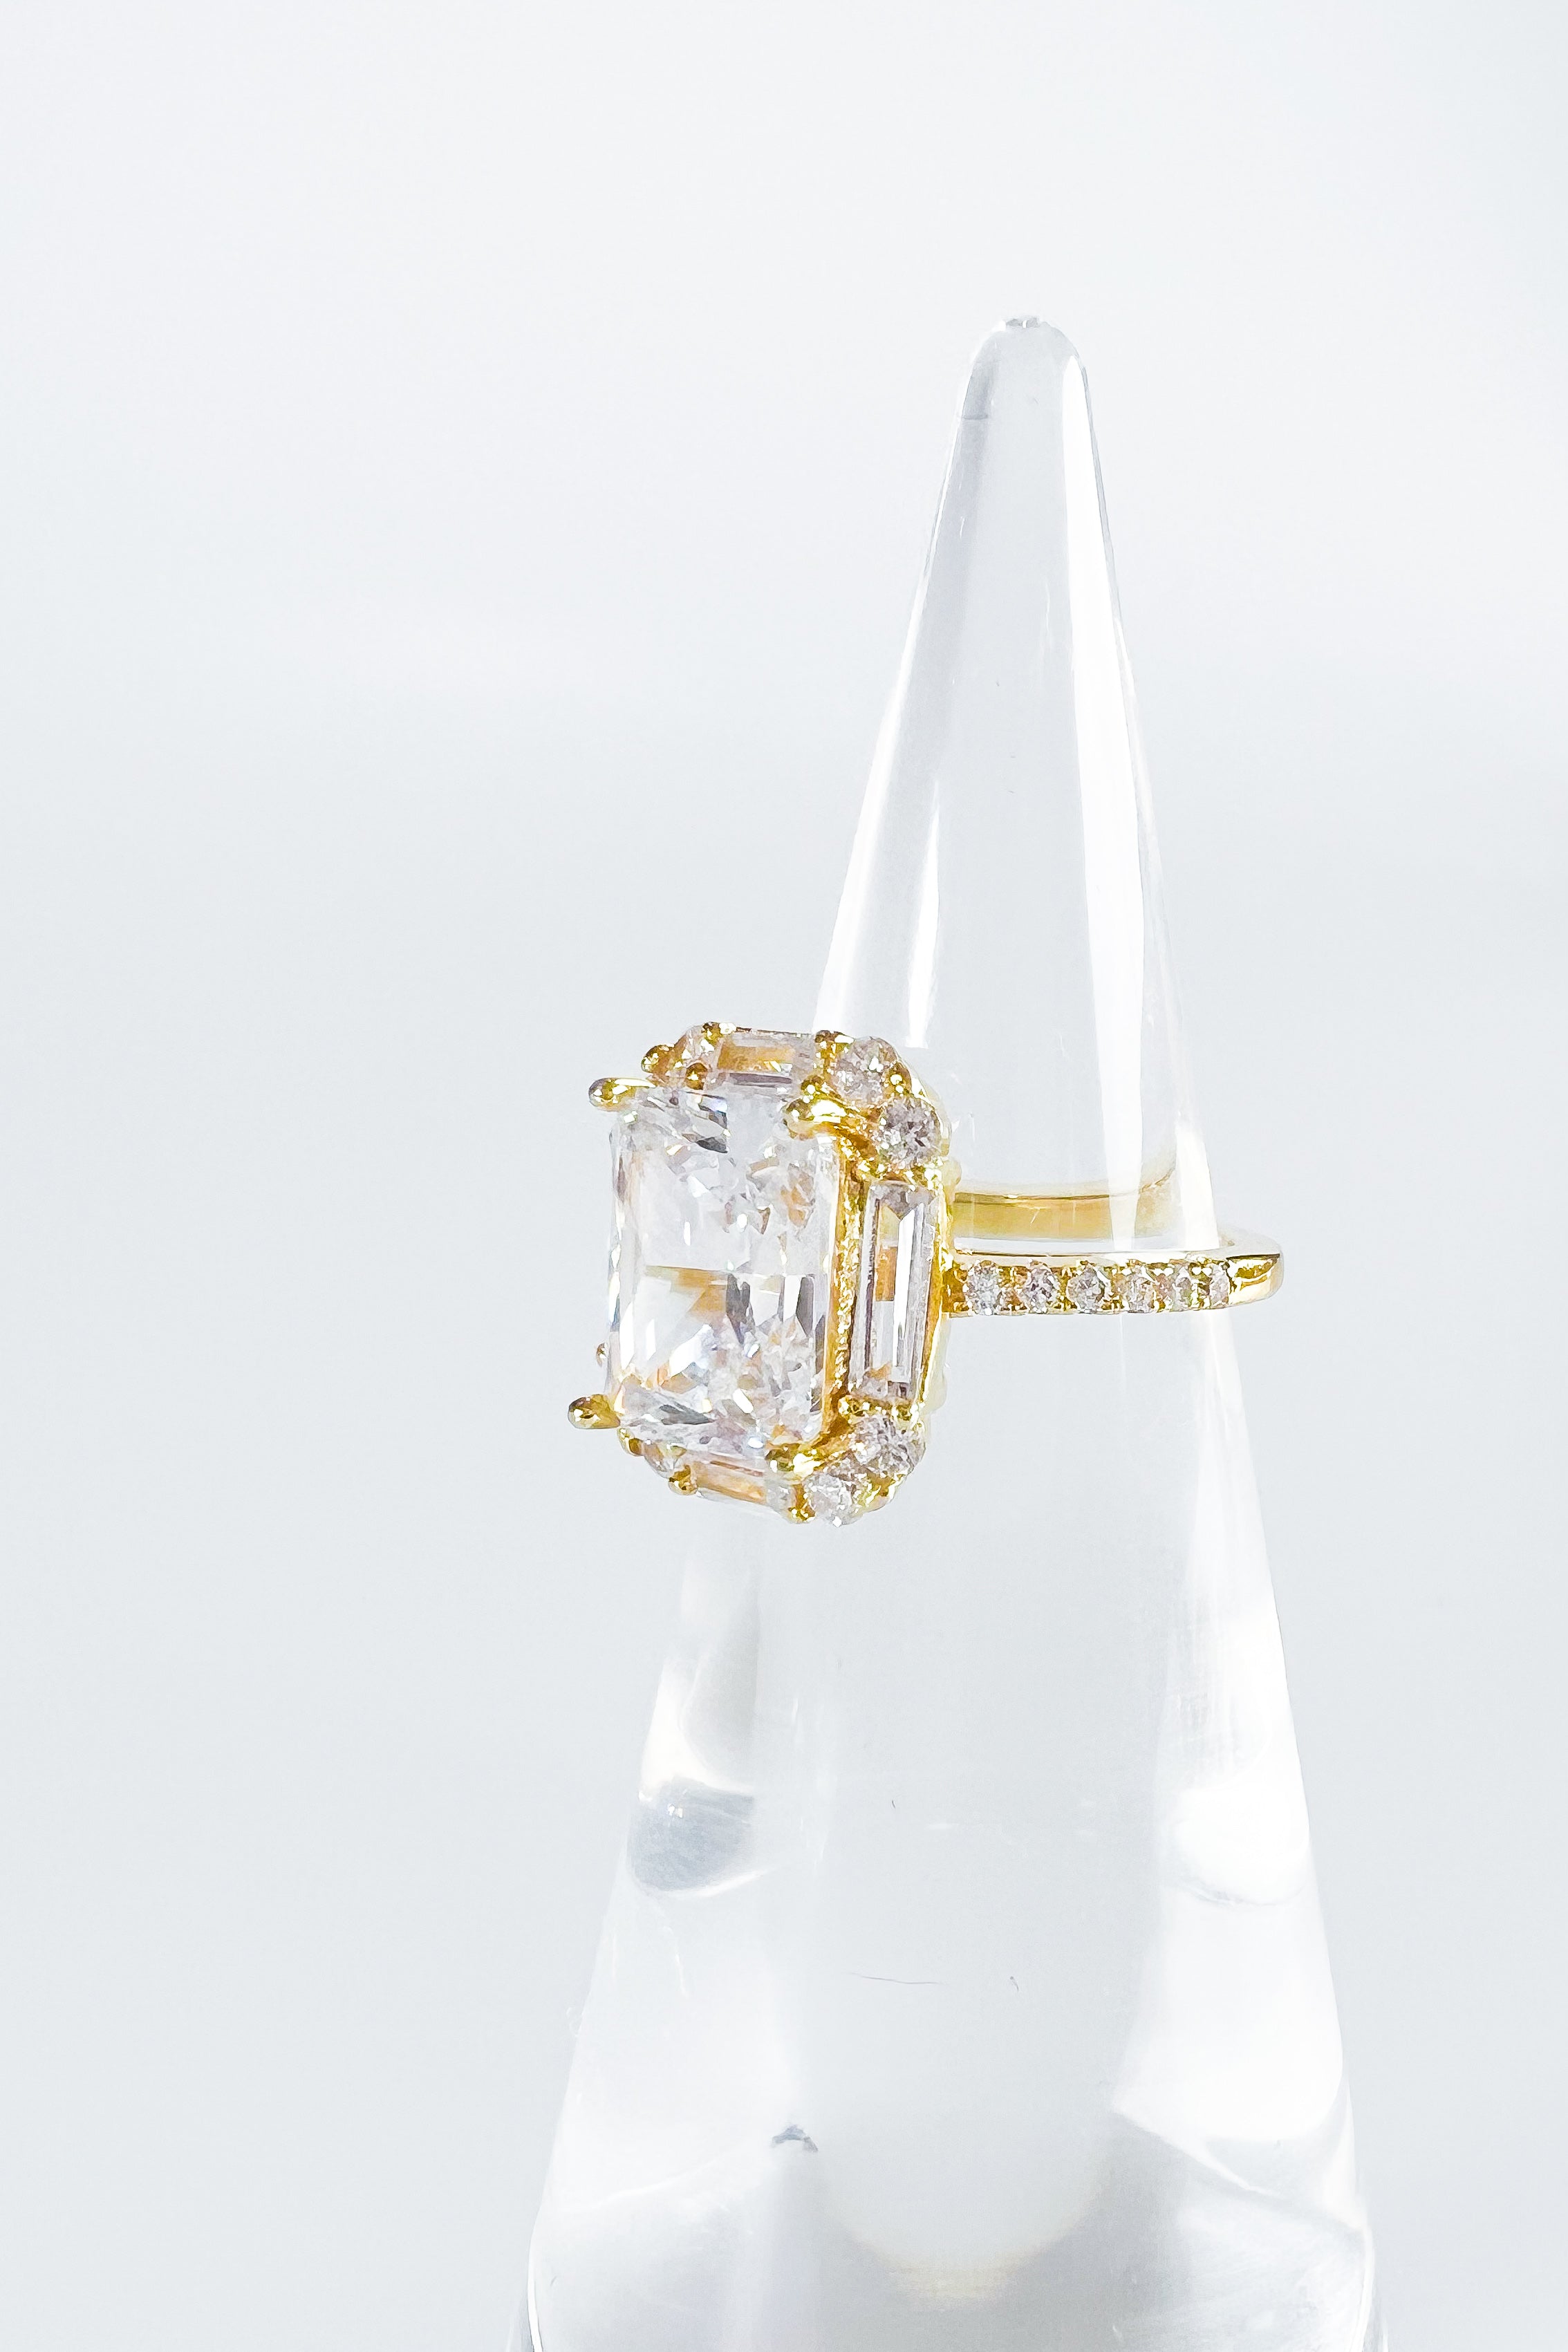 1.25 Carat Emerald Cut Accented Solitaire Engagement Ring in White Gol —  kisnagems.co.uk